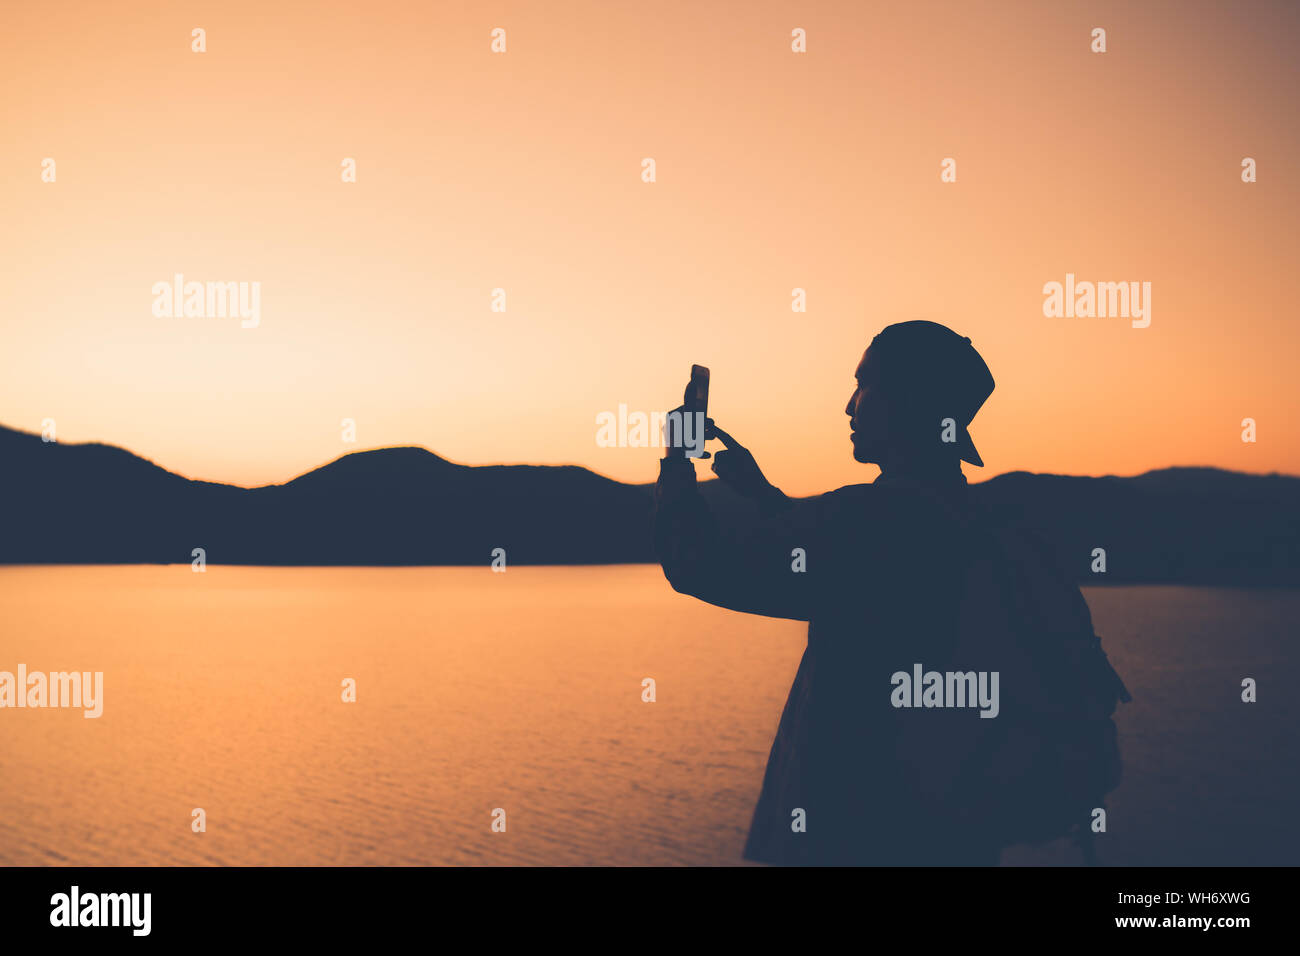 The Silhouette Of Man Sitting Alone At The Beach Concept Of Lonely Sad Alone Person Space Alone And Scared Stock Photo Alamy